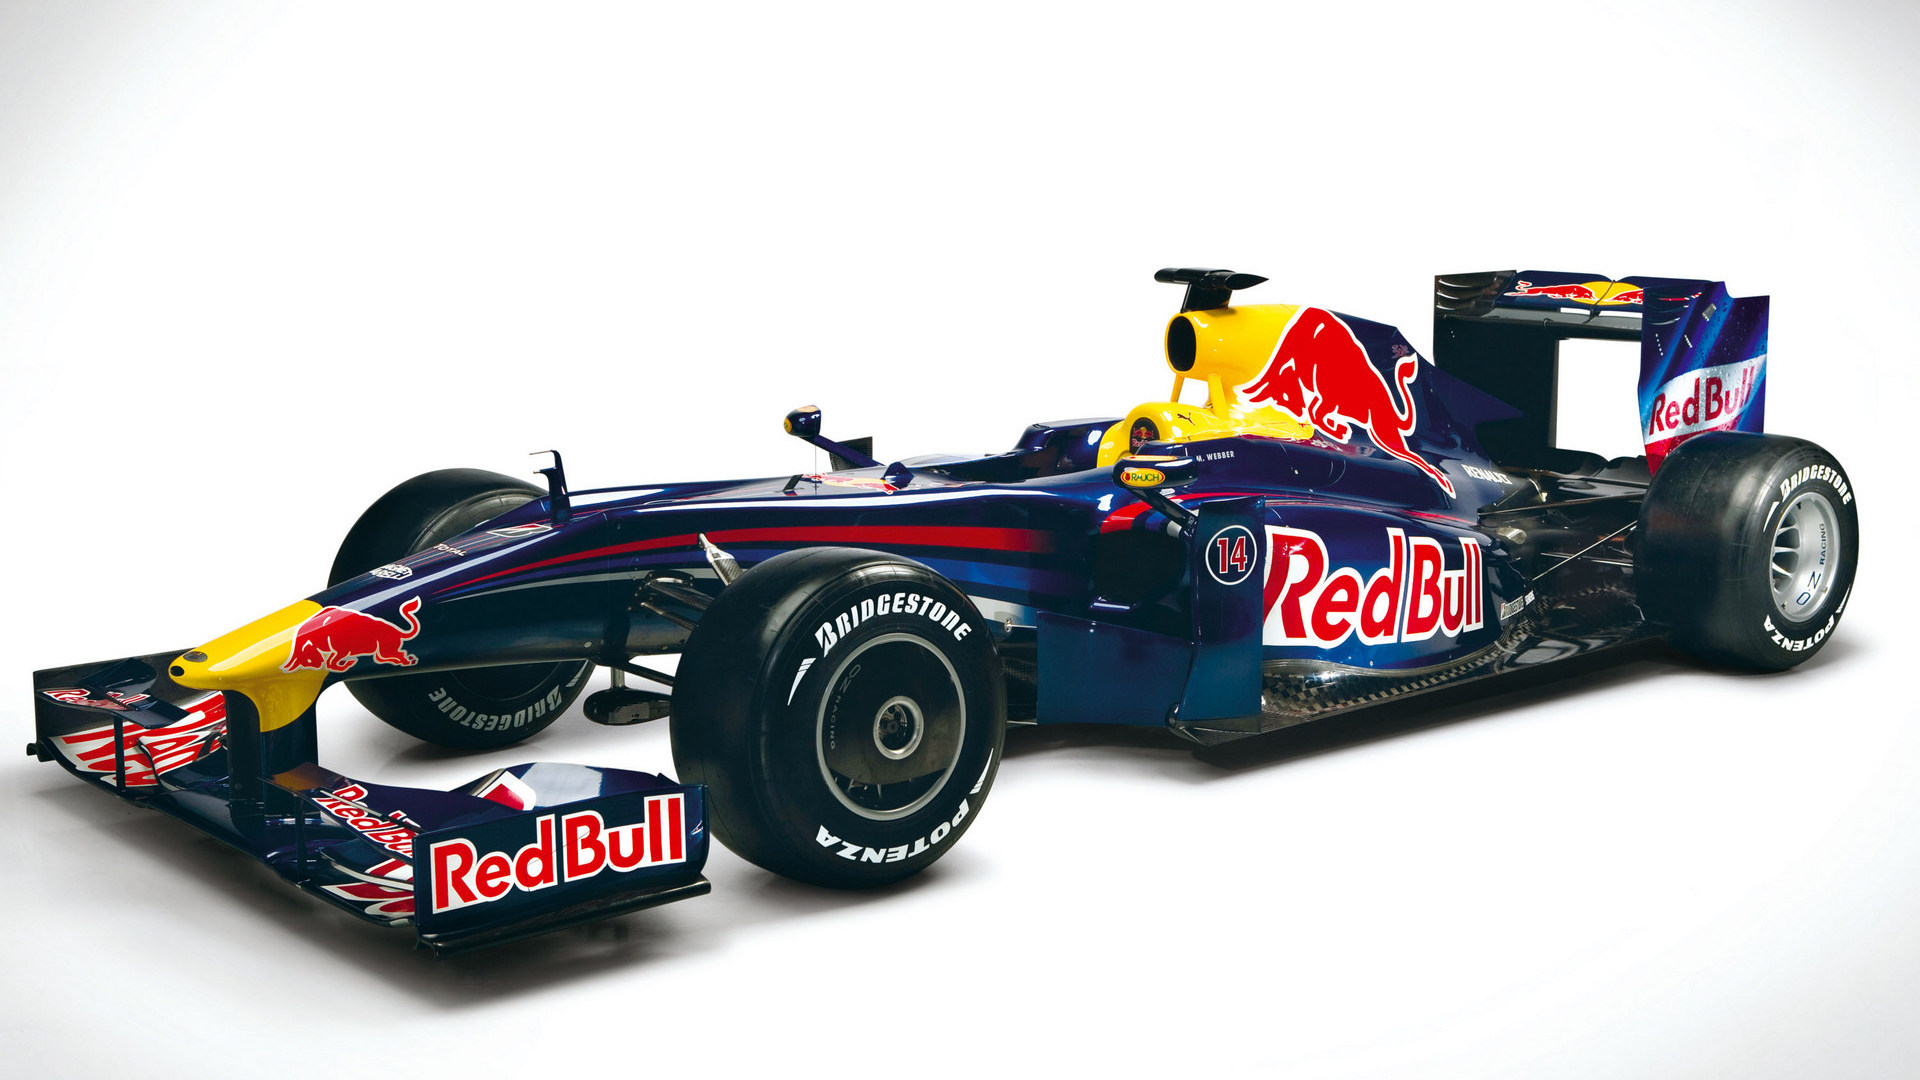 HD Wallpaper F1 Car Launches Fansite